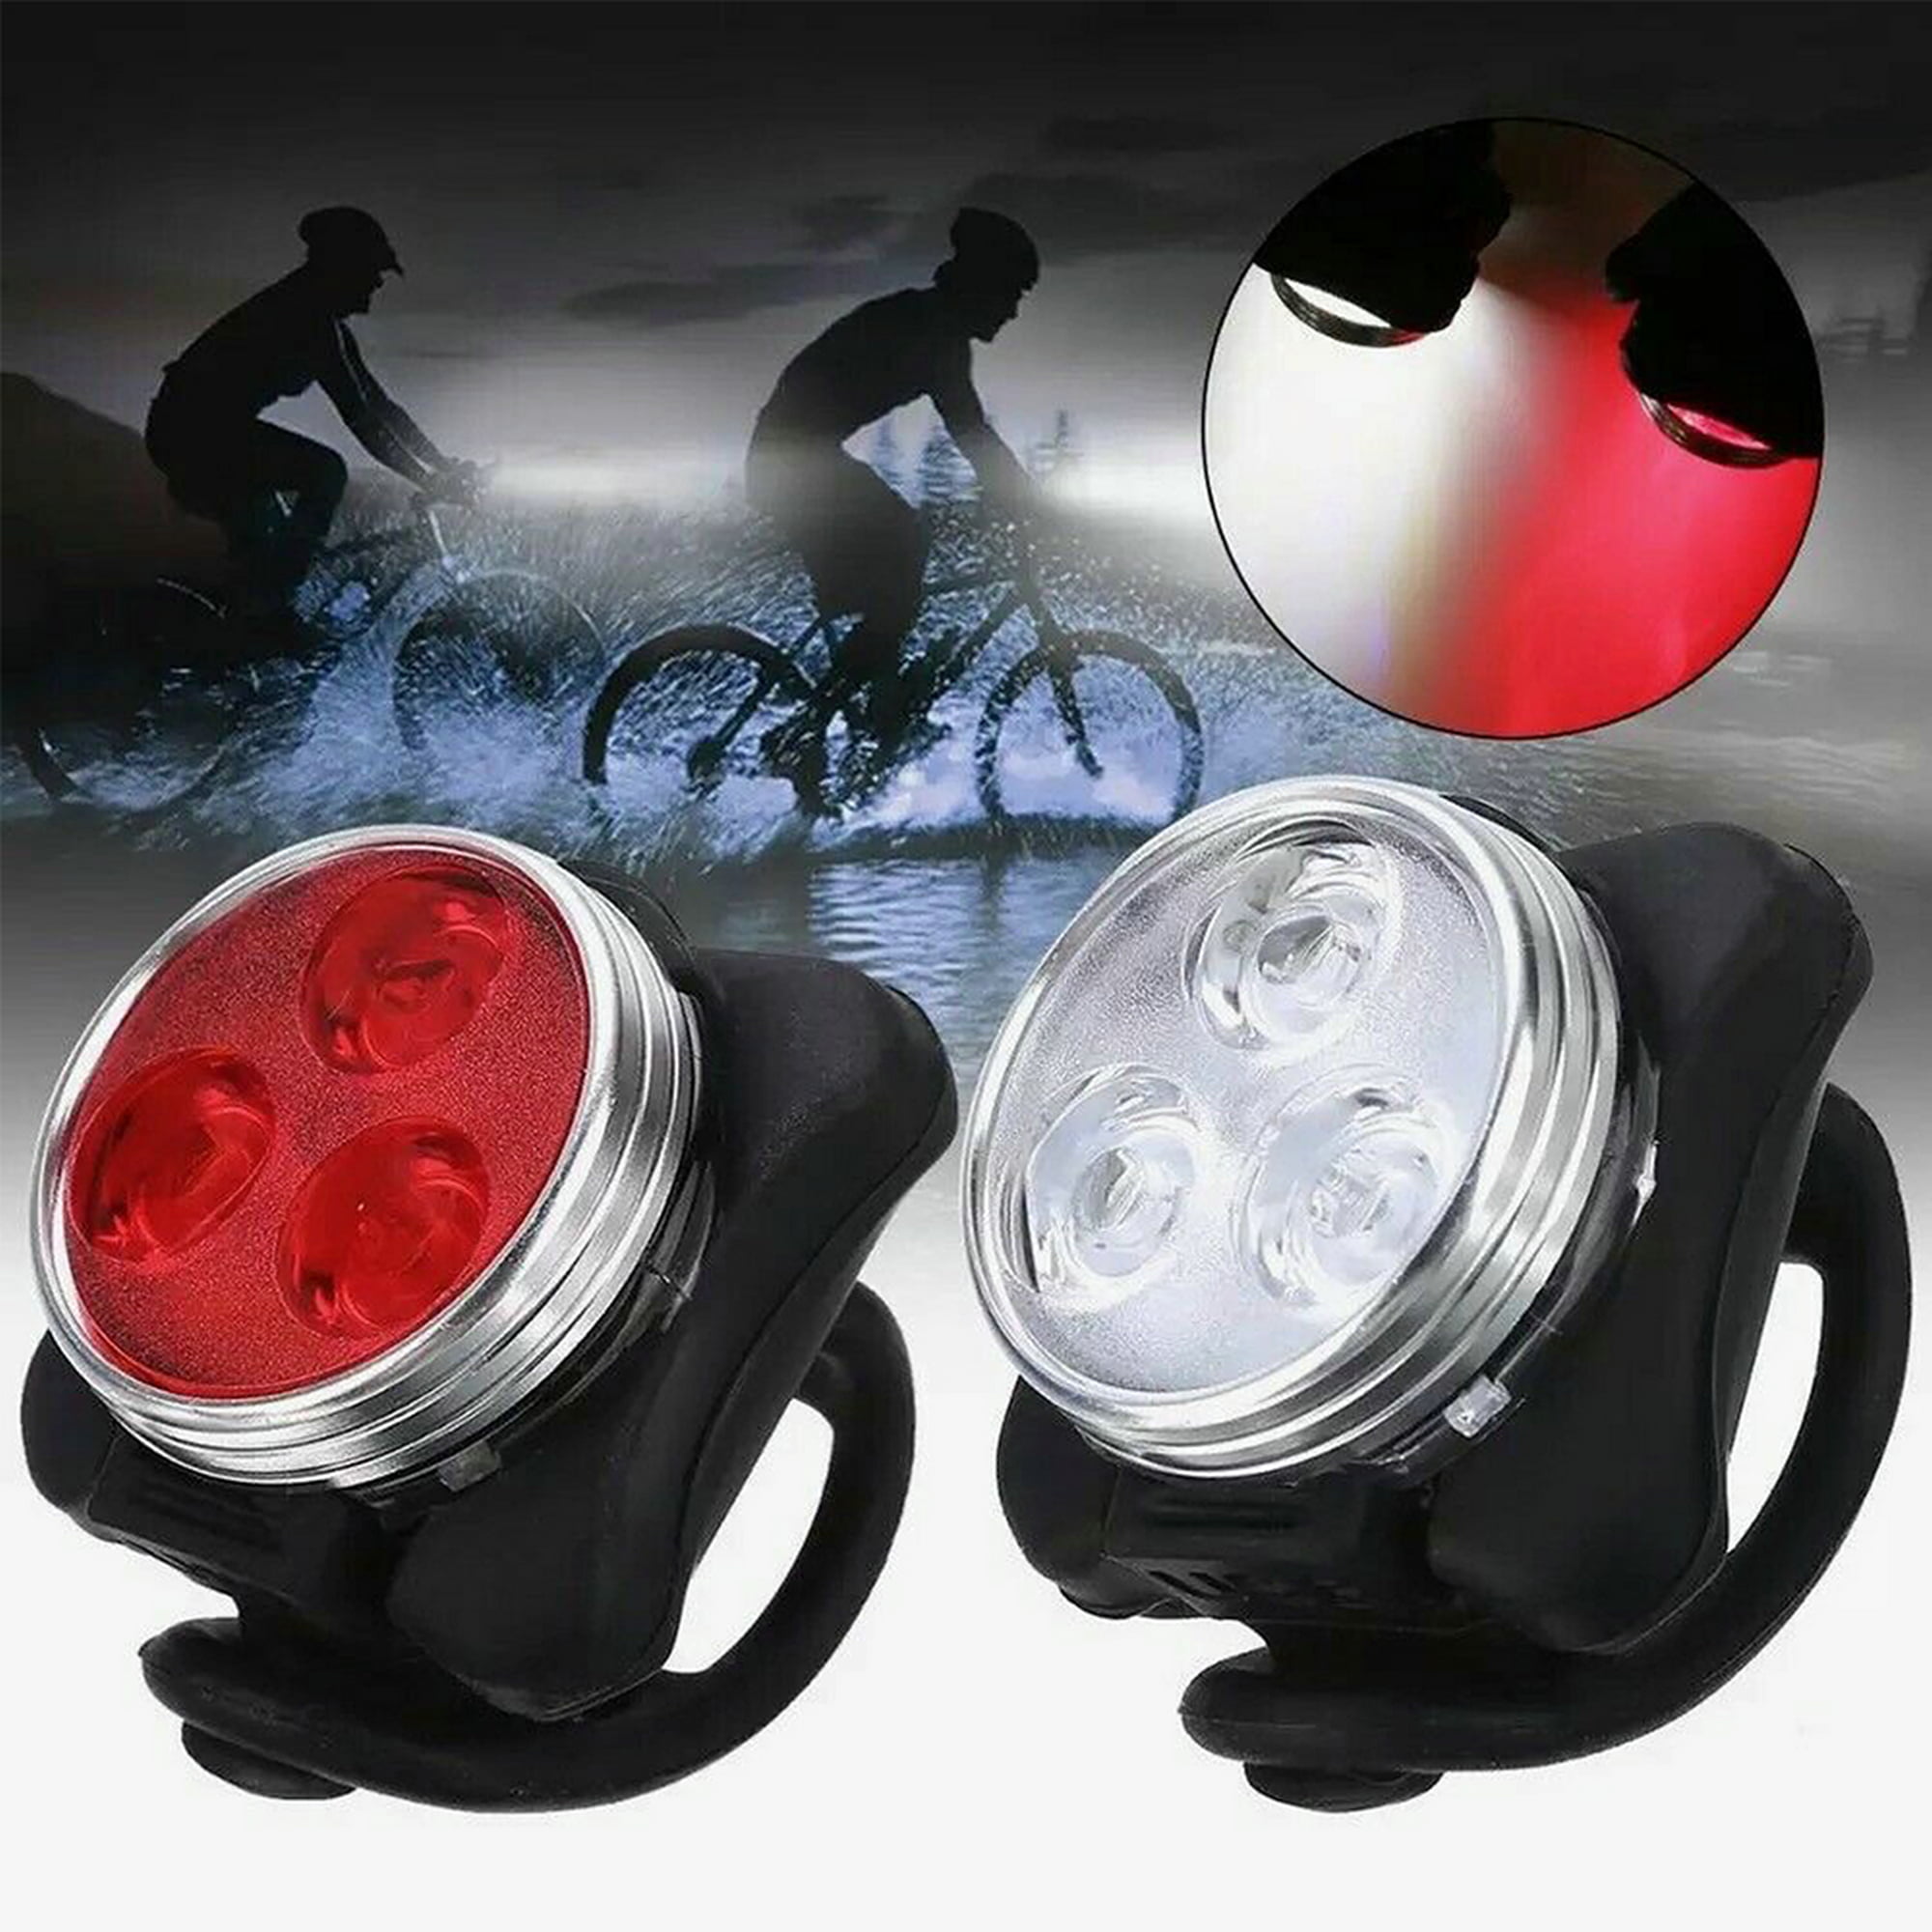 LED Bicycle Headlight Bike Head Rear Light Front Lamp Cycling USB Rechargeable 